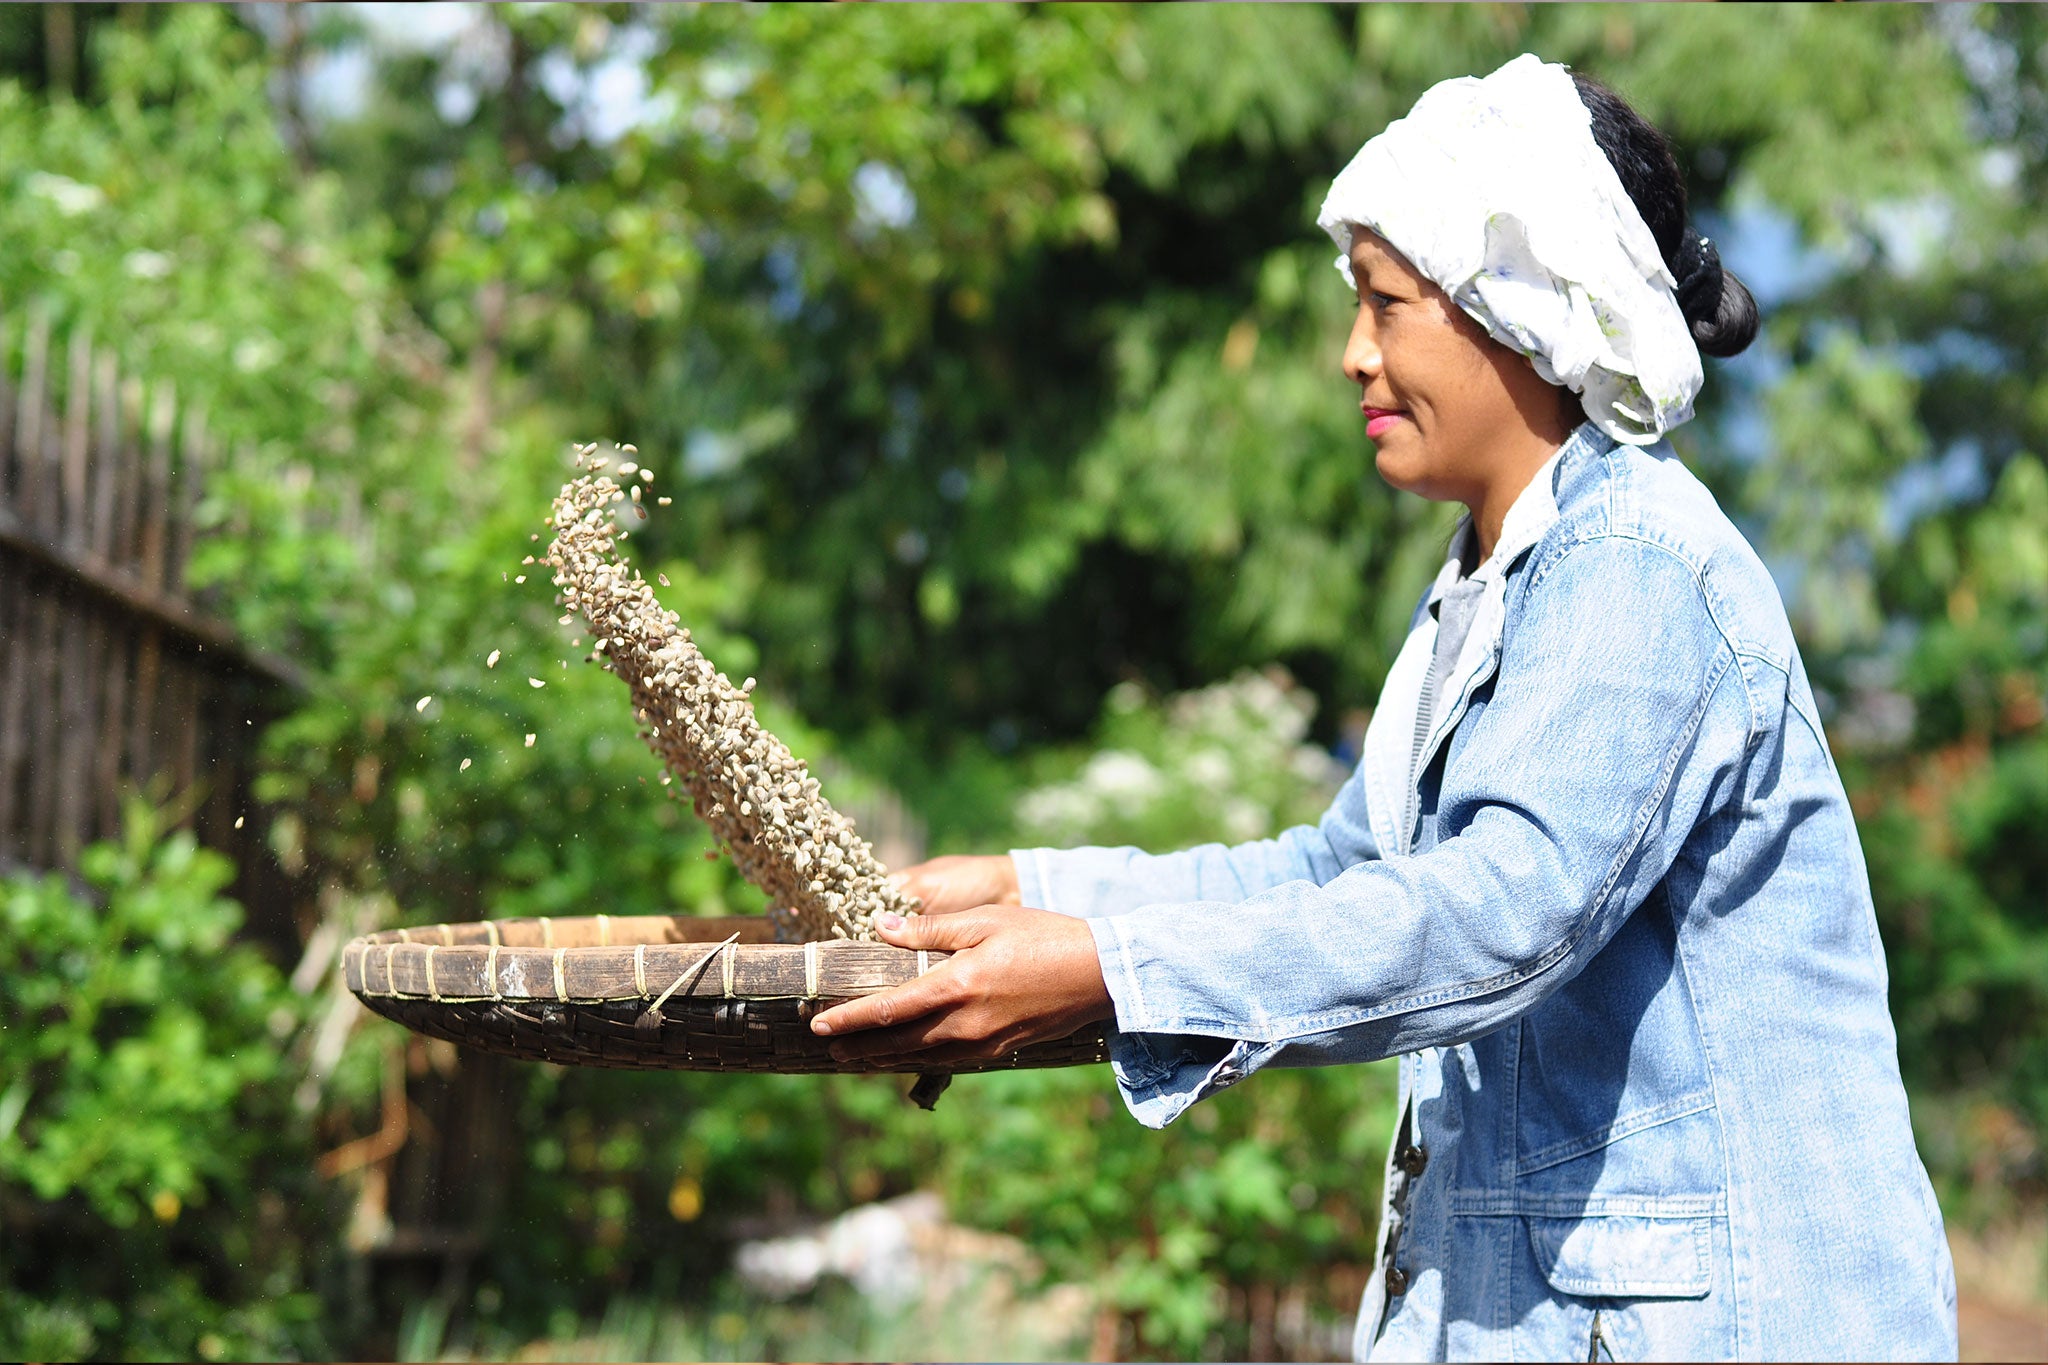 Woman standing outdoors in the sun, flipping basket of coffee beans in the air to dry them.